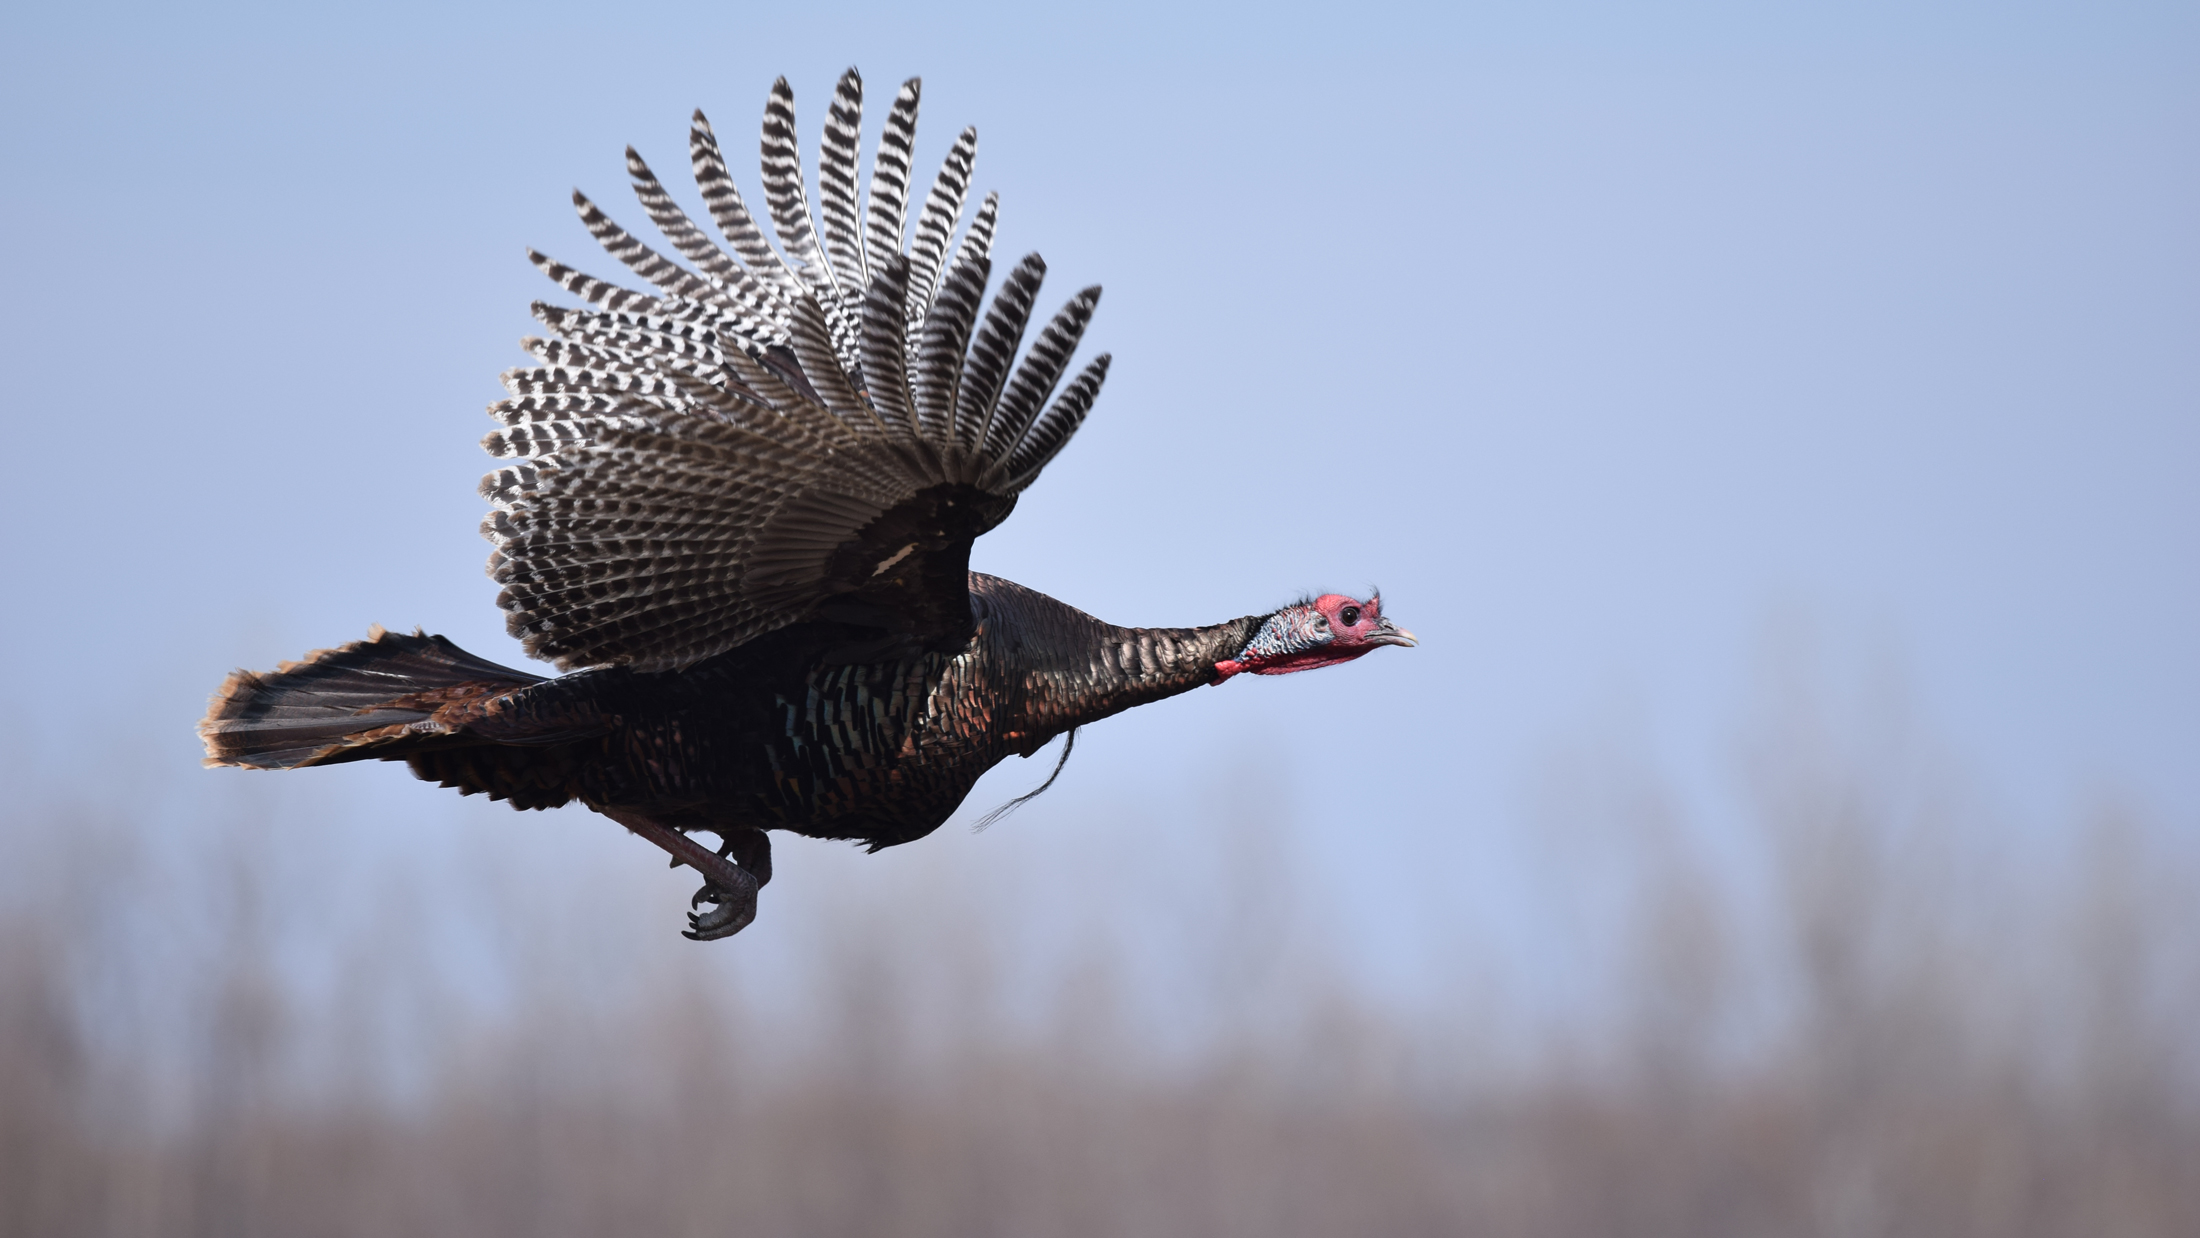 How fast can a turkey fly?